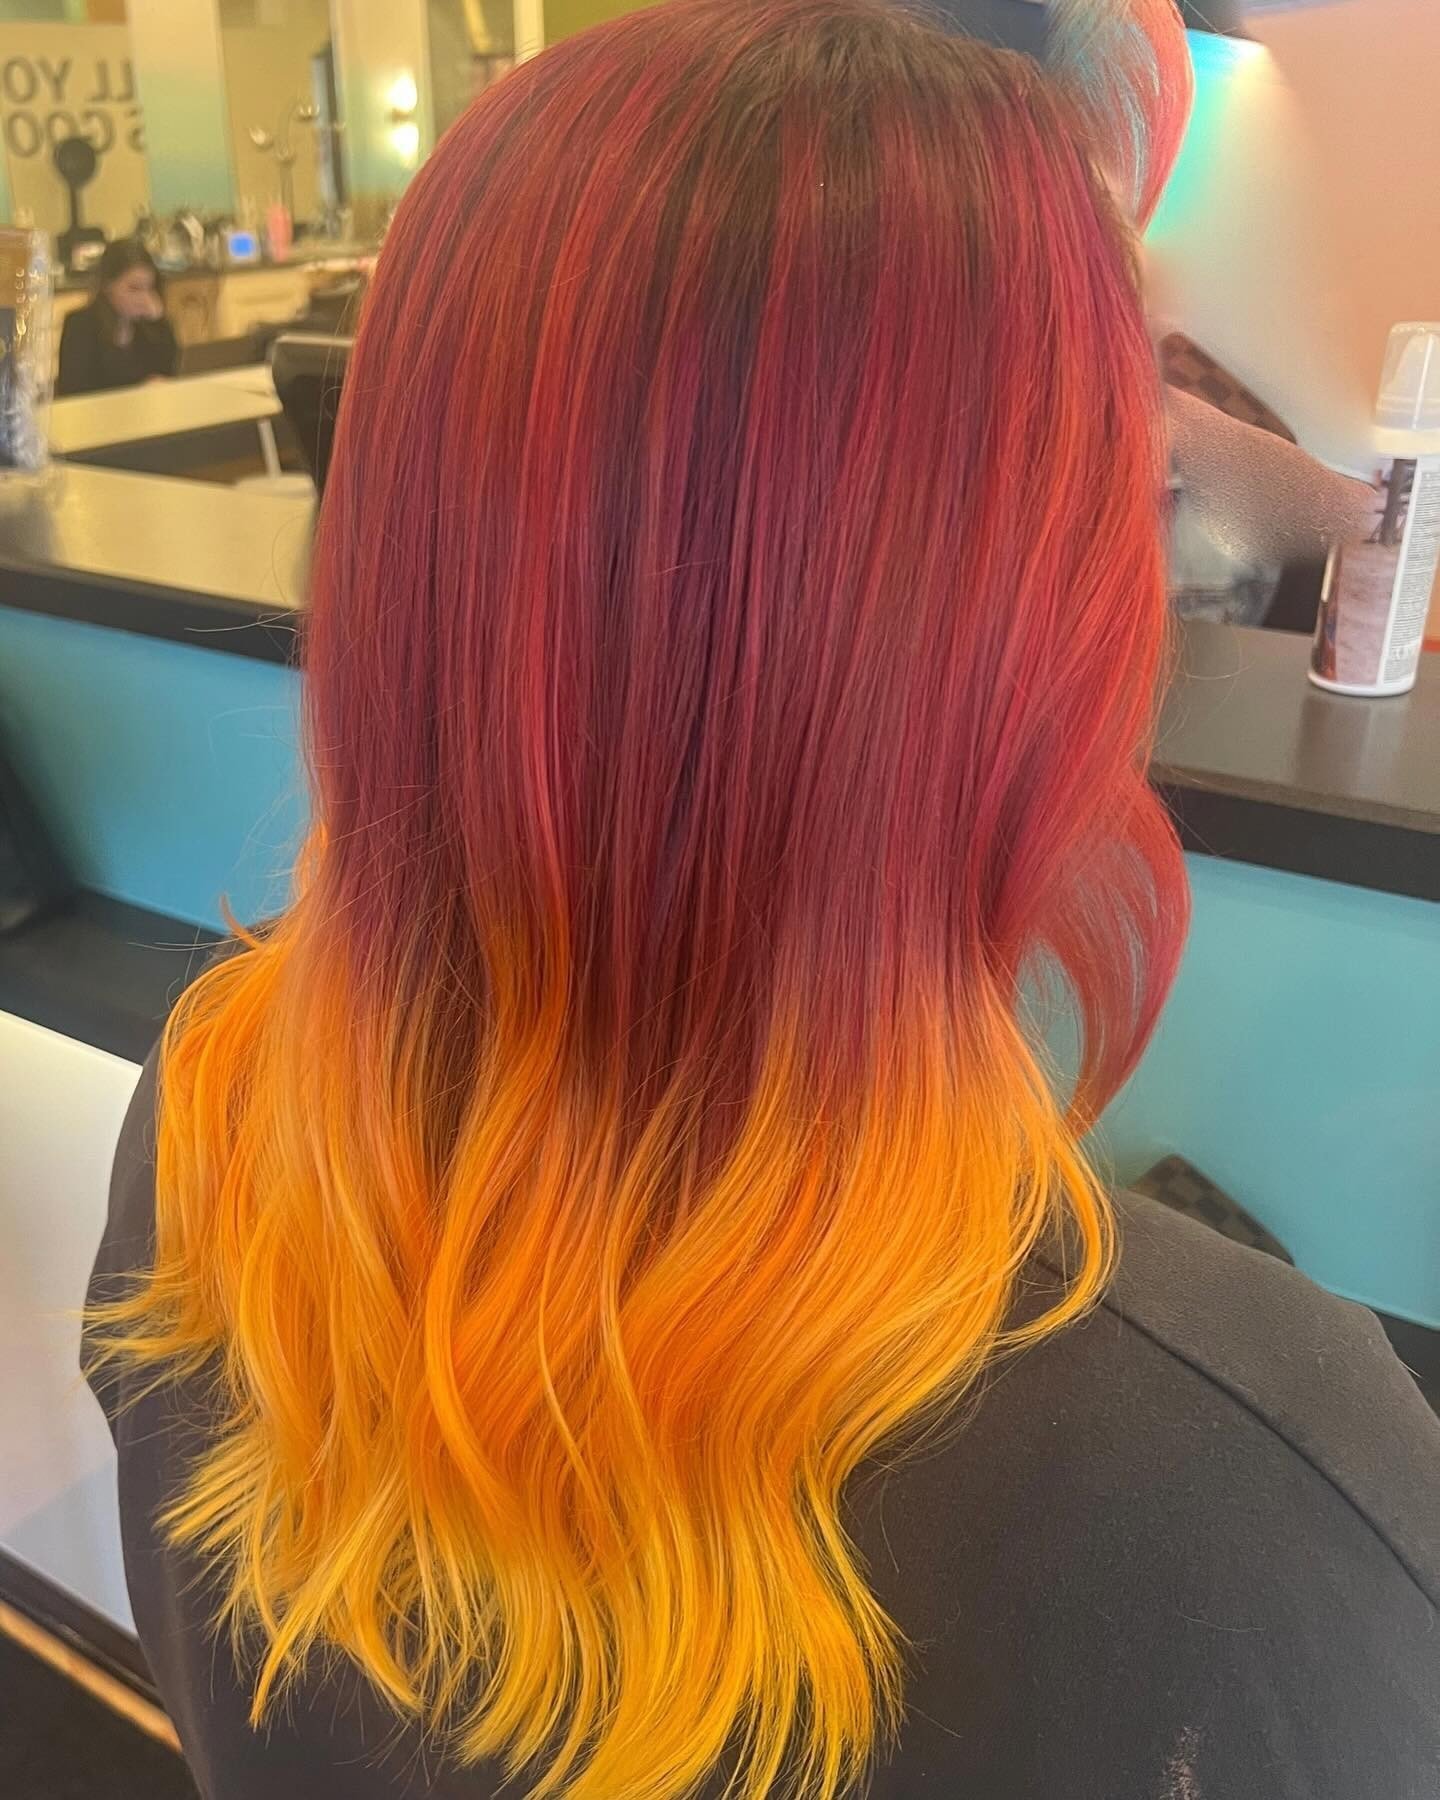 Check out this amazing sunset hair! 🌅 This stunning look created by ⁠
📷️ @locks_by_lomax. ⁠
⁠
Get inspired by the beautiful colors and visit #danteluccisalon in Rocky River. ⁠
⁠
This picture is a great example of what can be achieved!  Don't wait, 